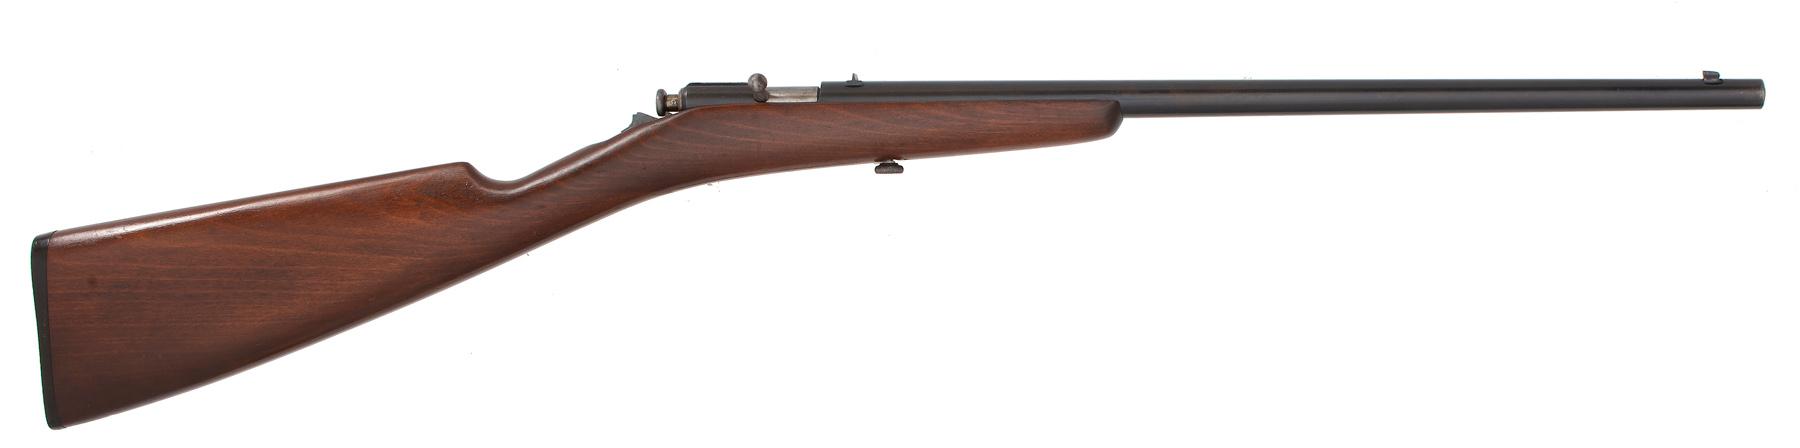 Winchester Thumb Trigger Rifle